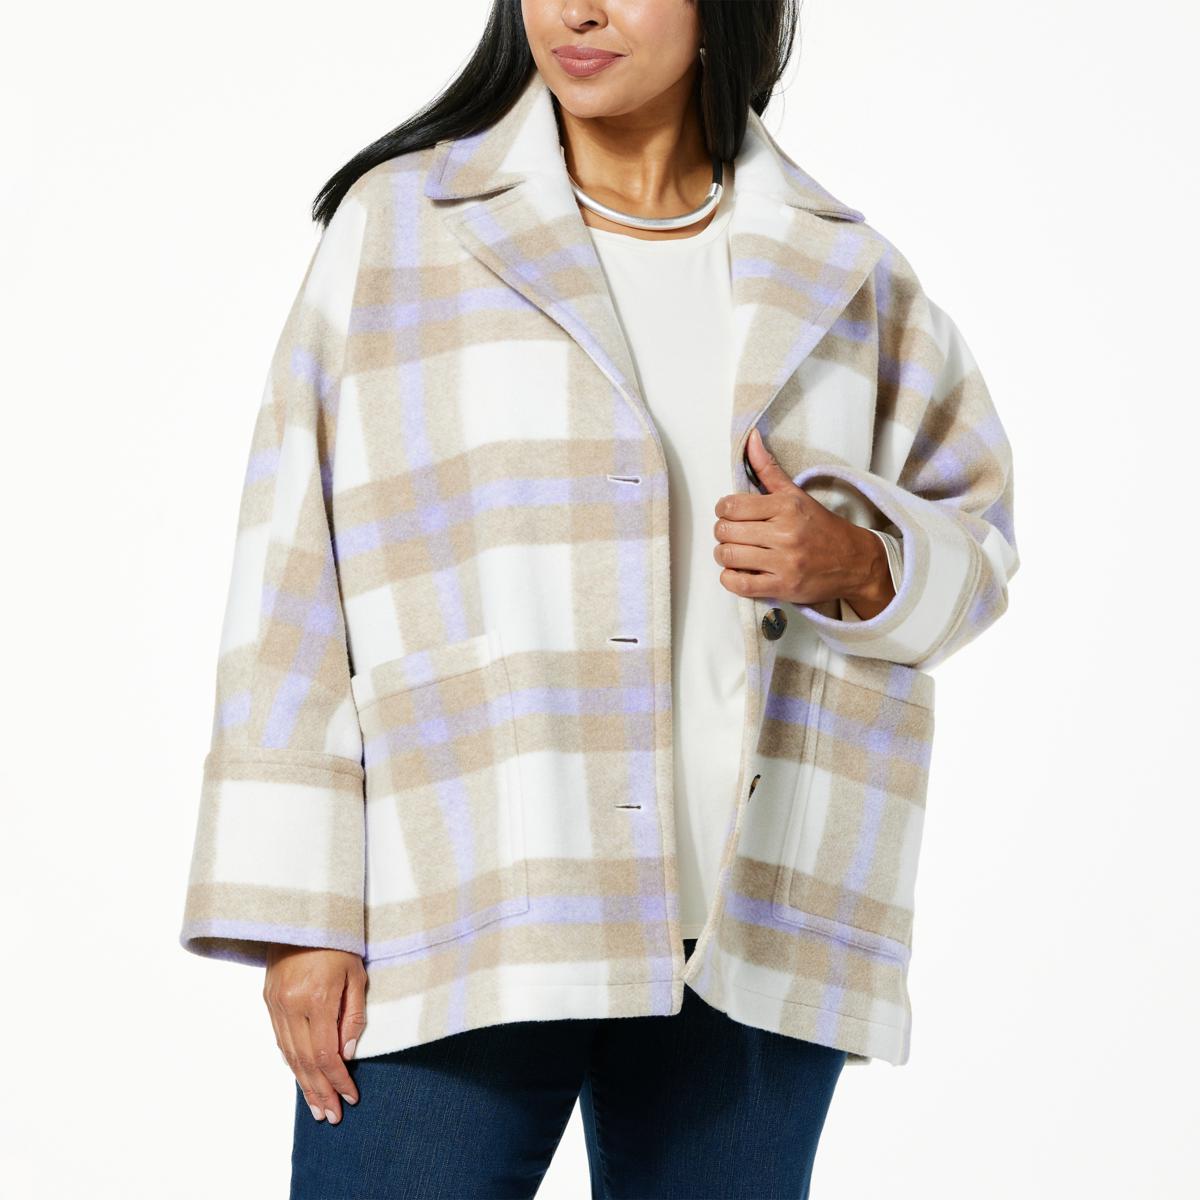 WynneCollection Unstructured Melton Coat